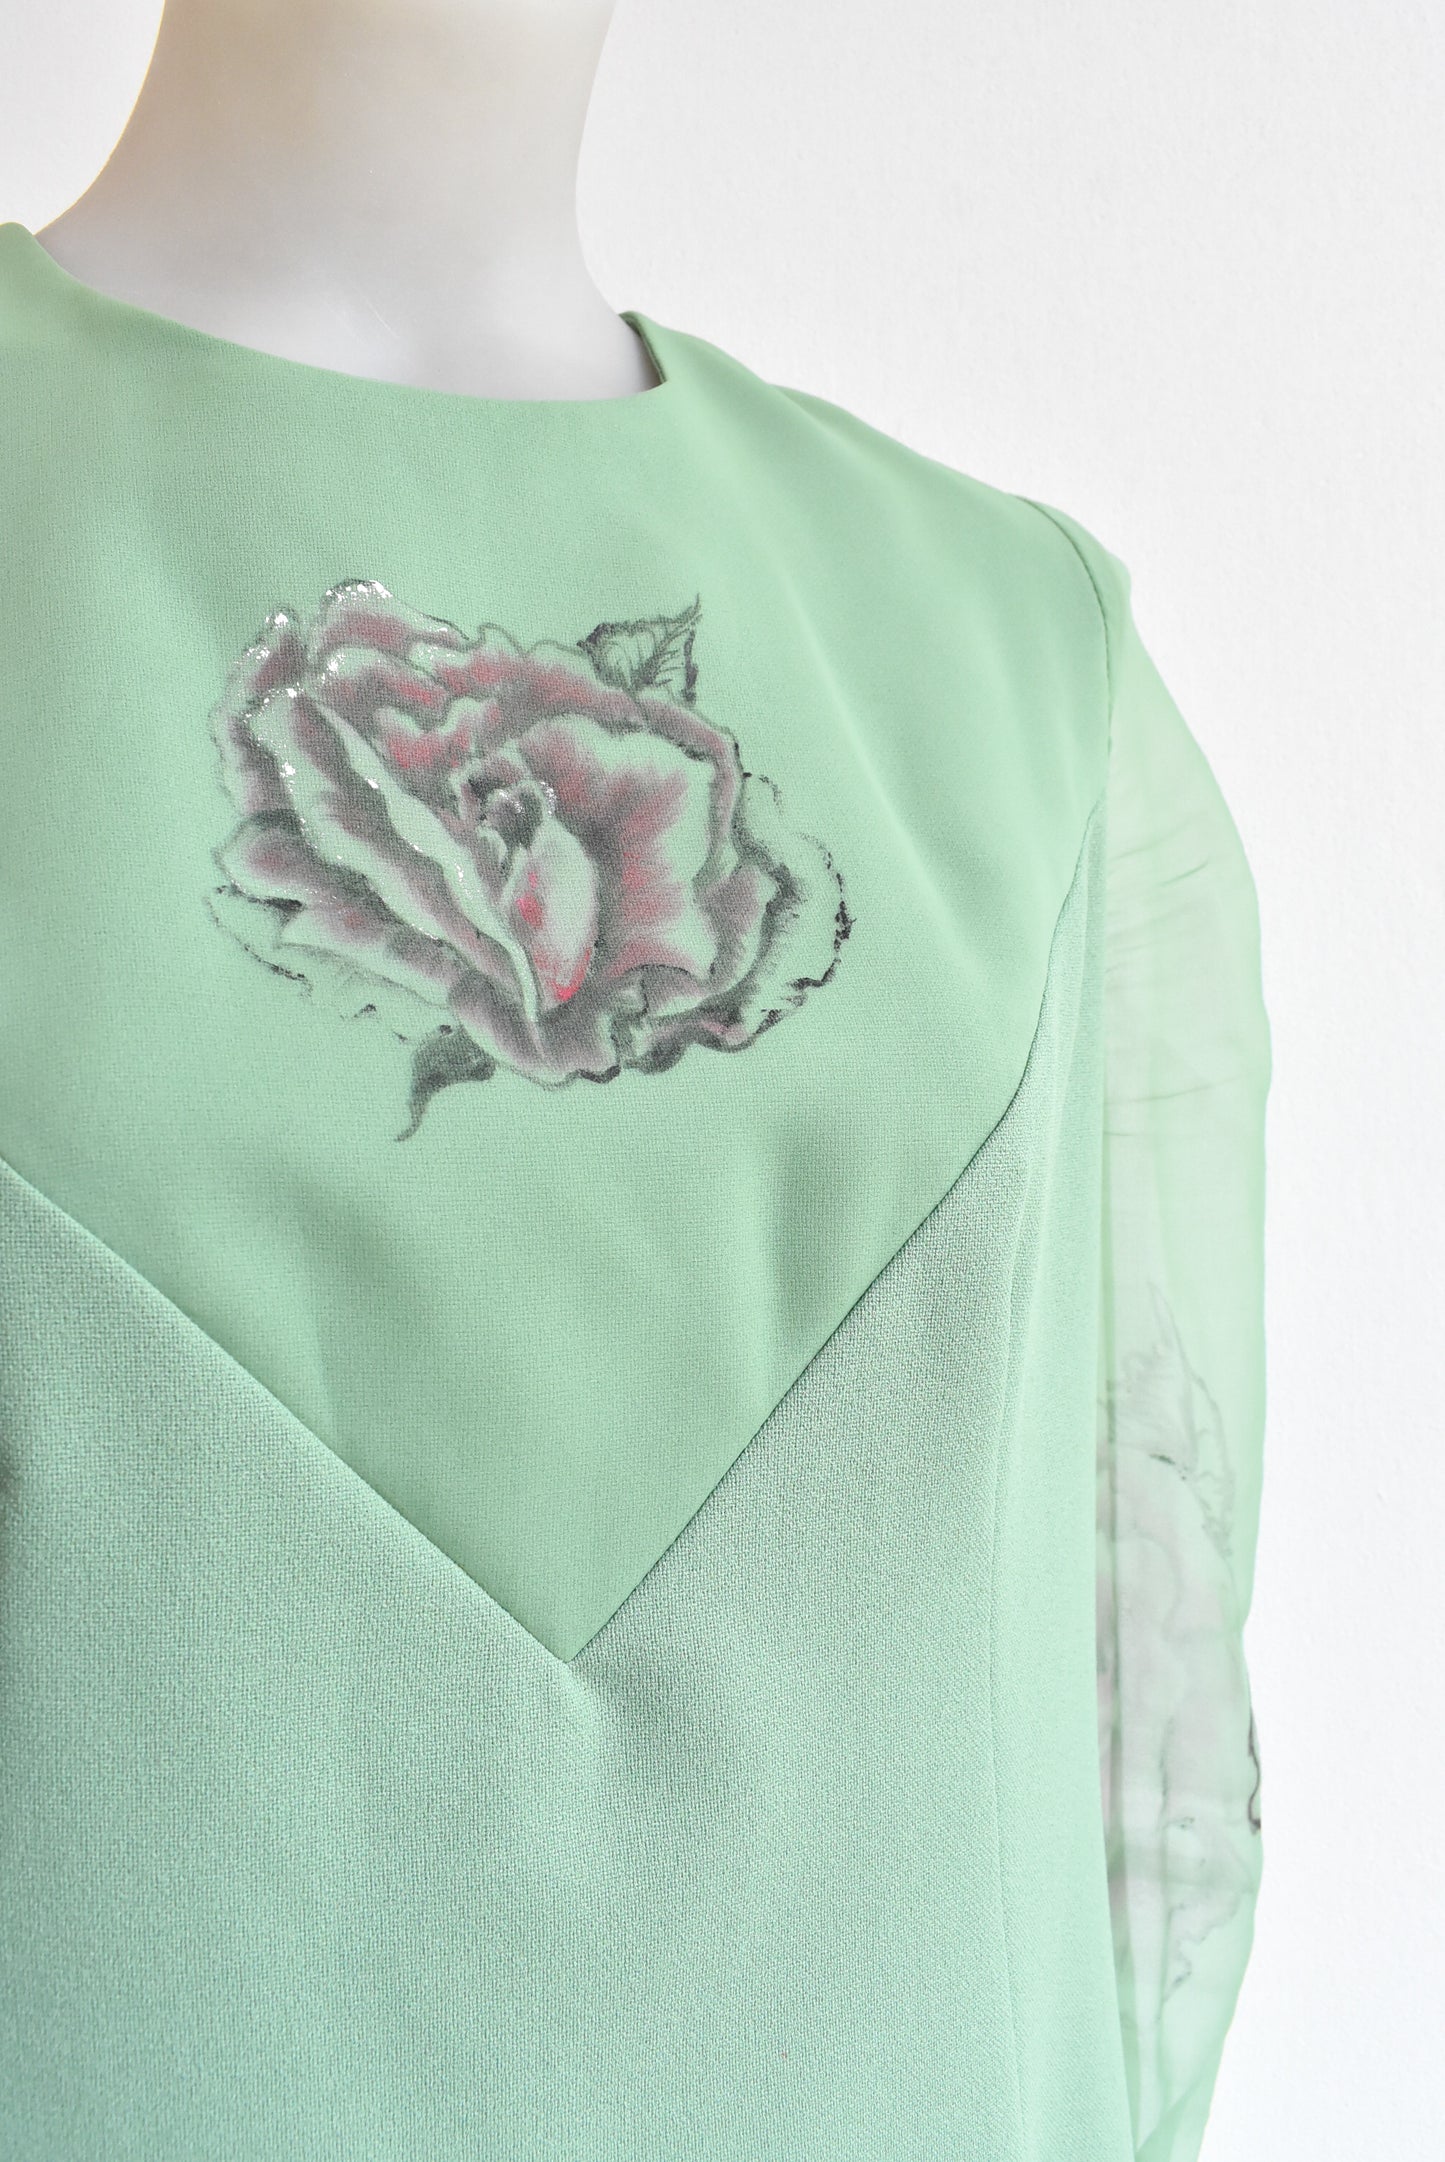 Vintage Gainsborough dress with painted roses